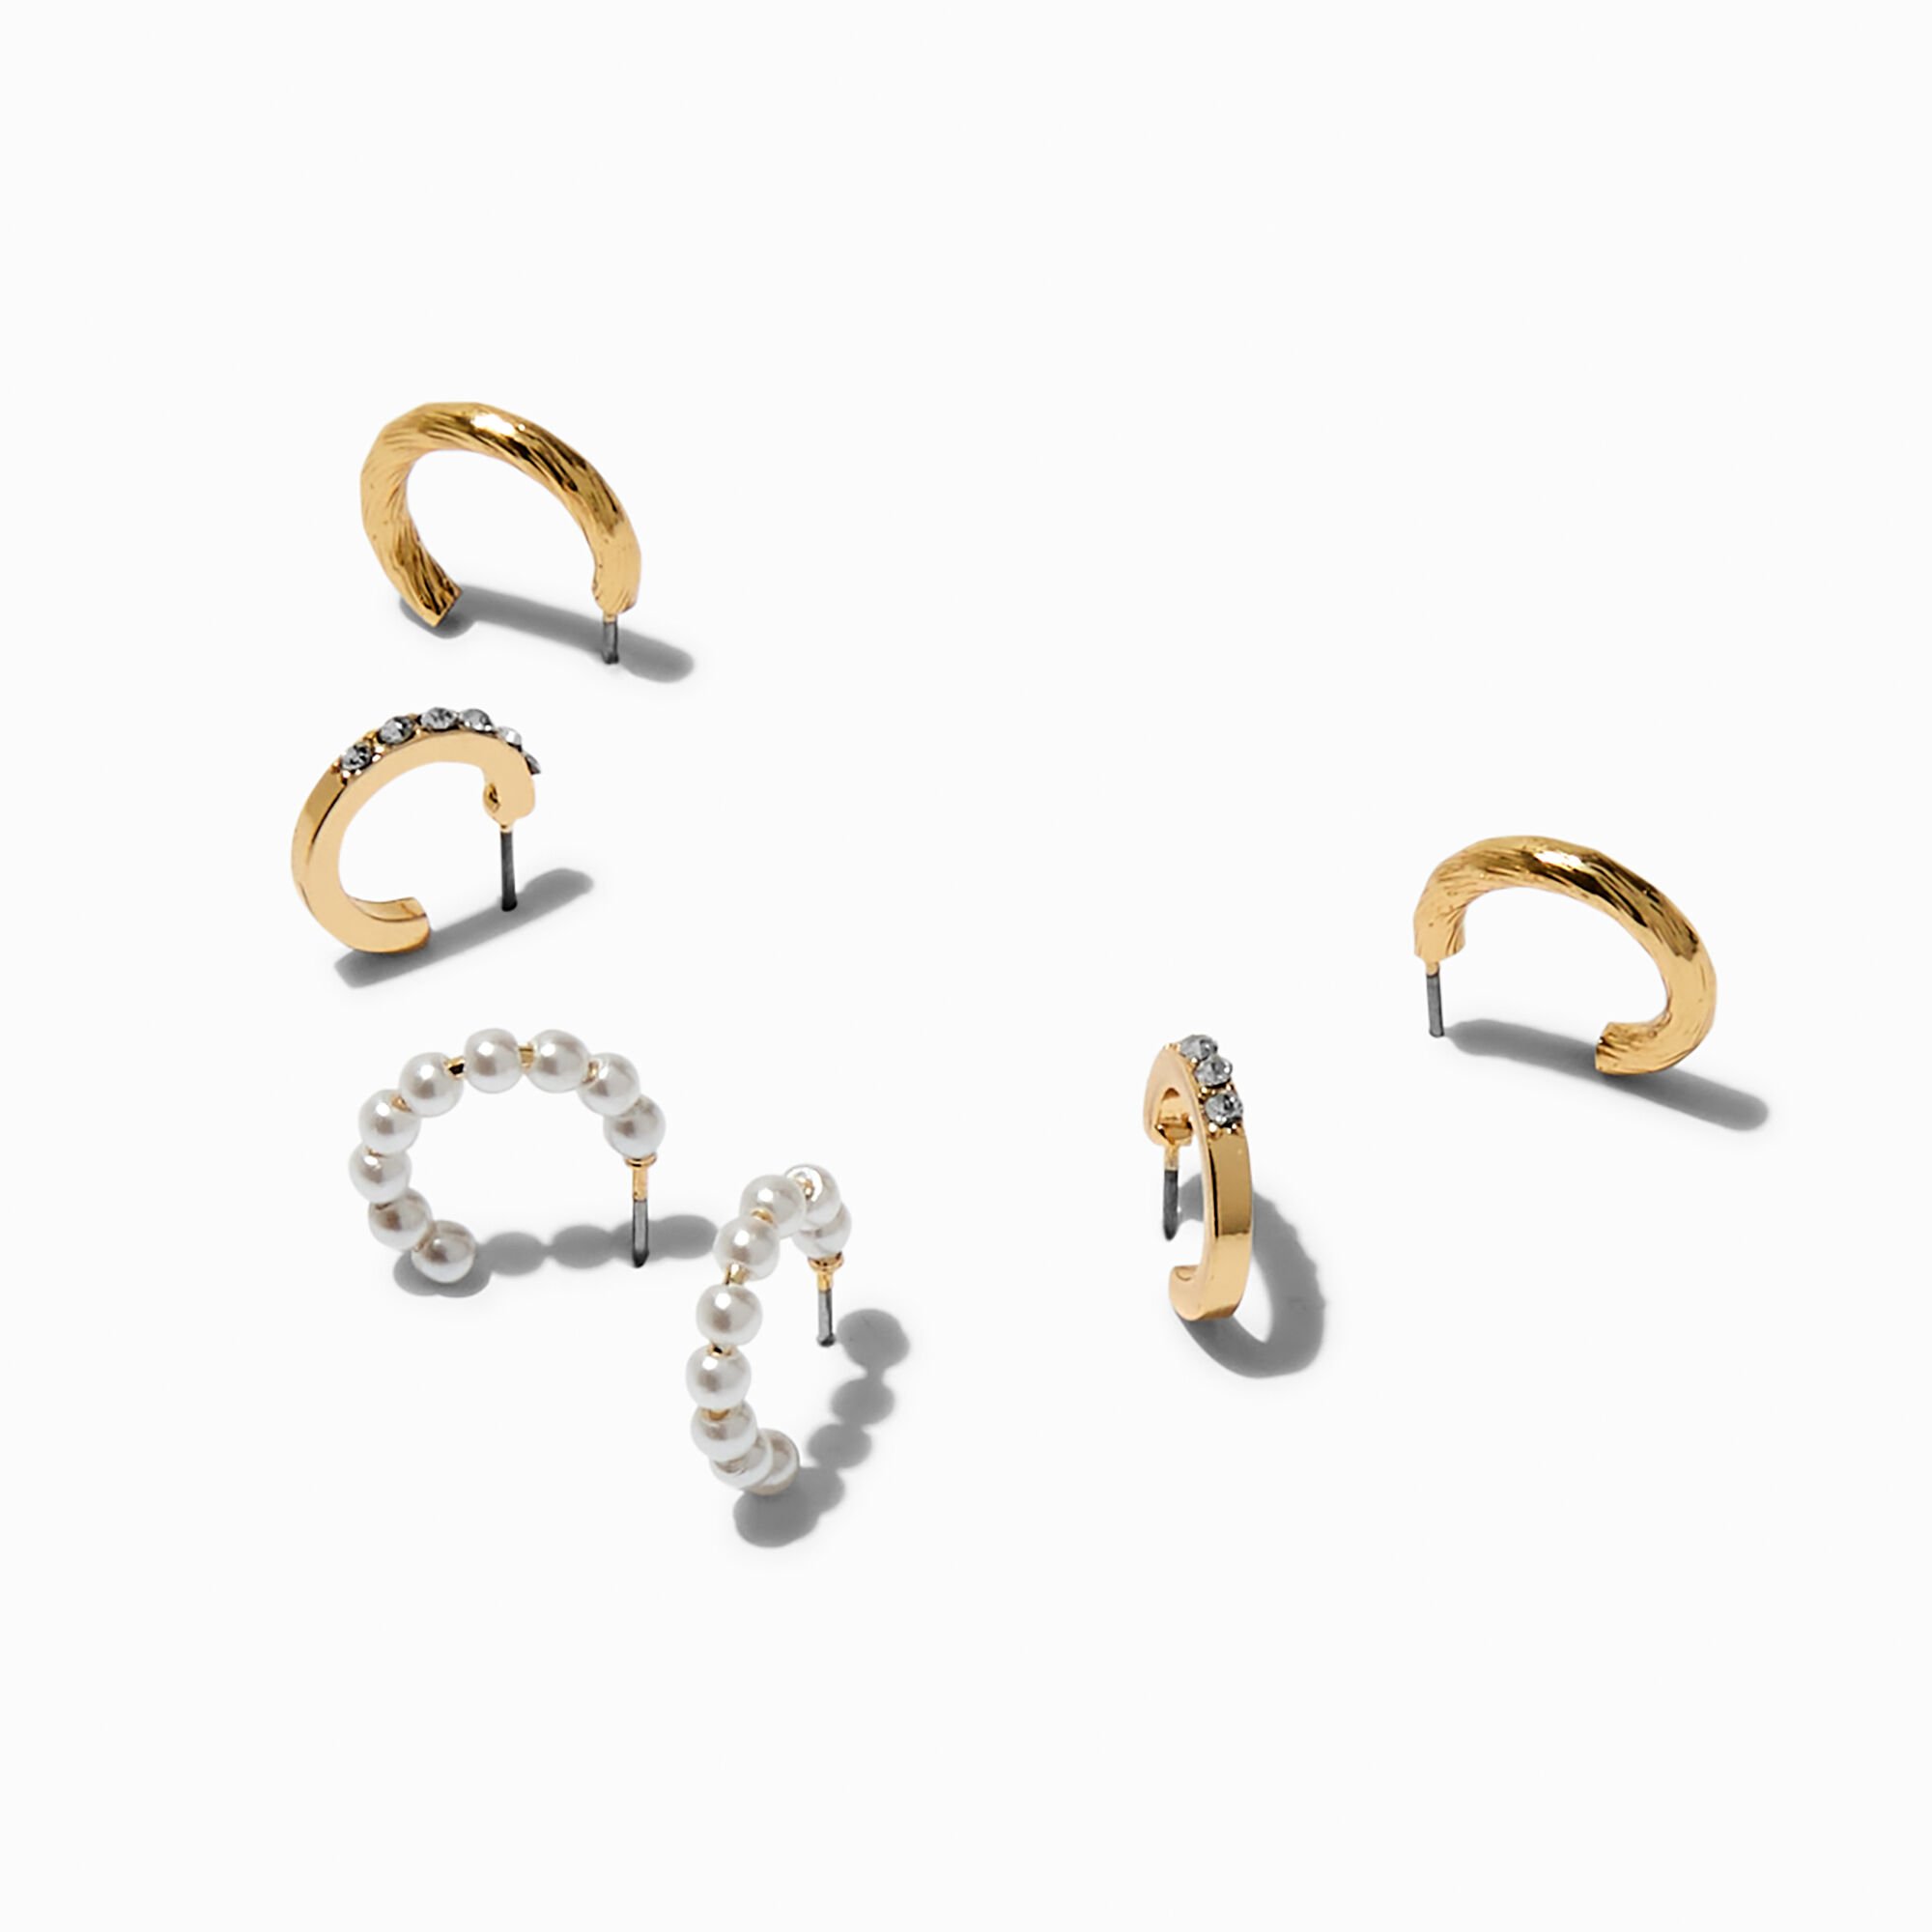 View Claires Tone Pearl Crystal Hoop Earring Stackables 3 Pack Gold information